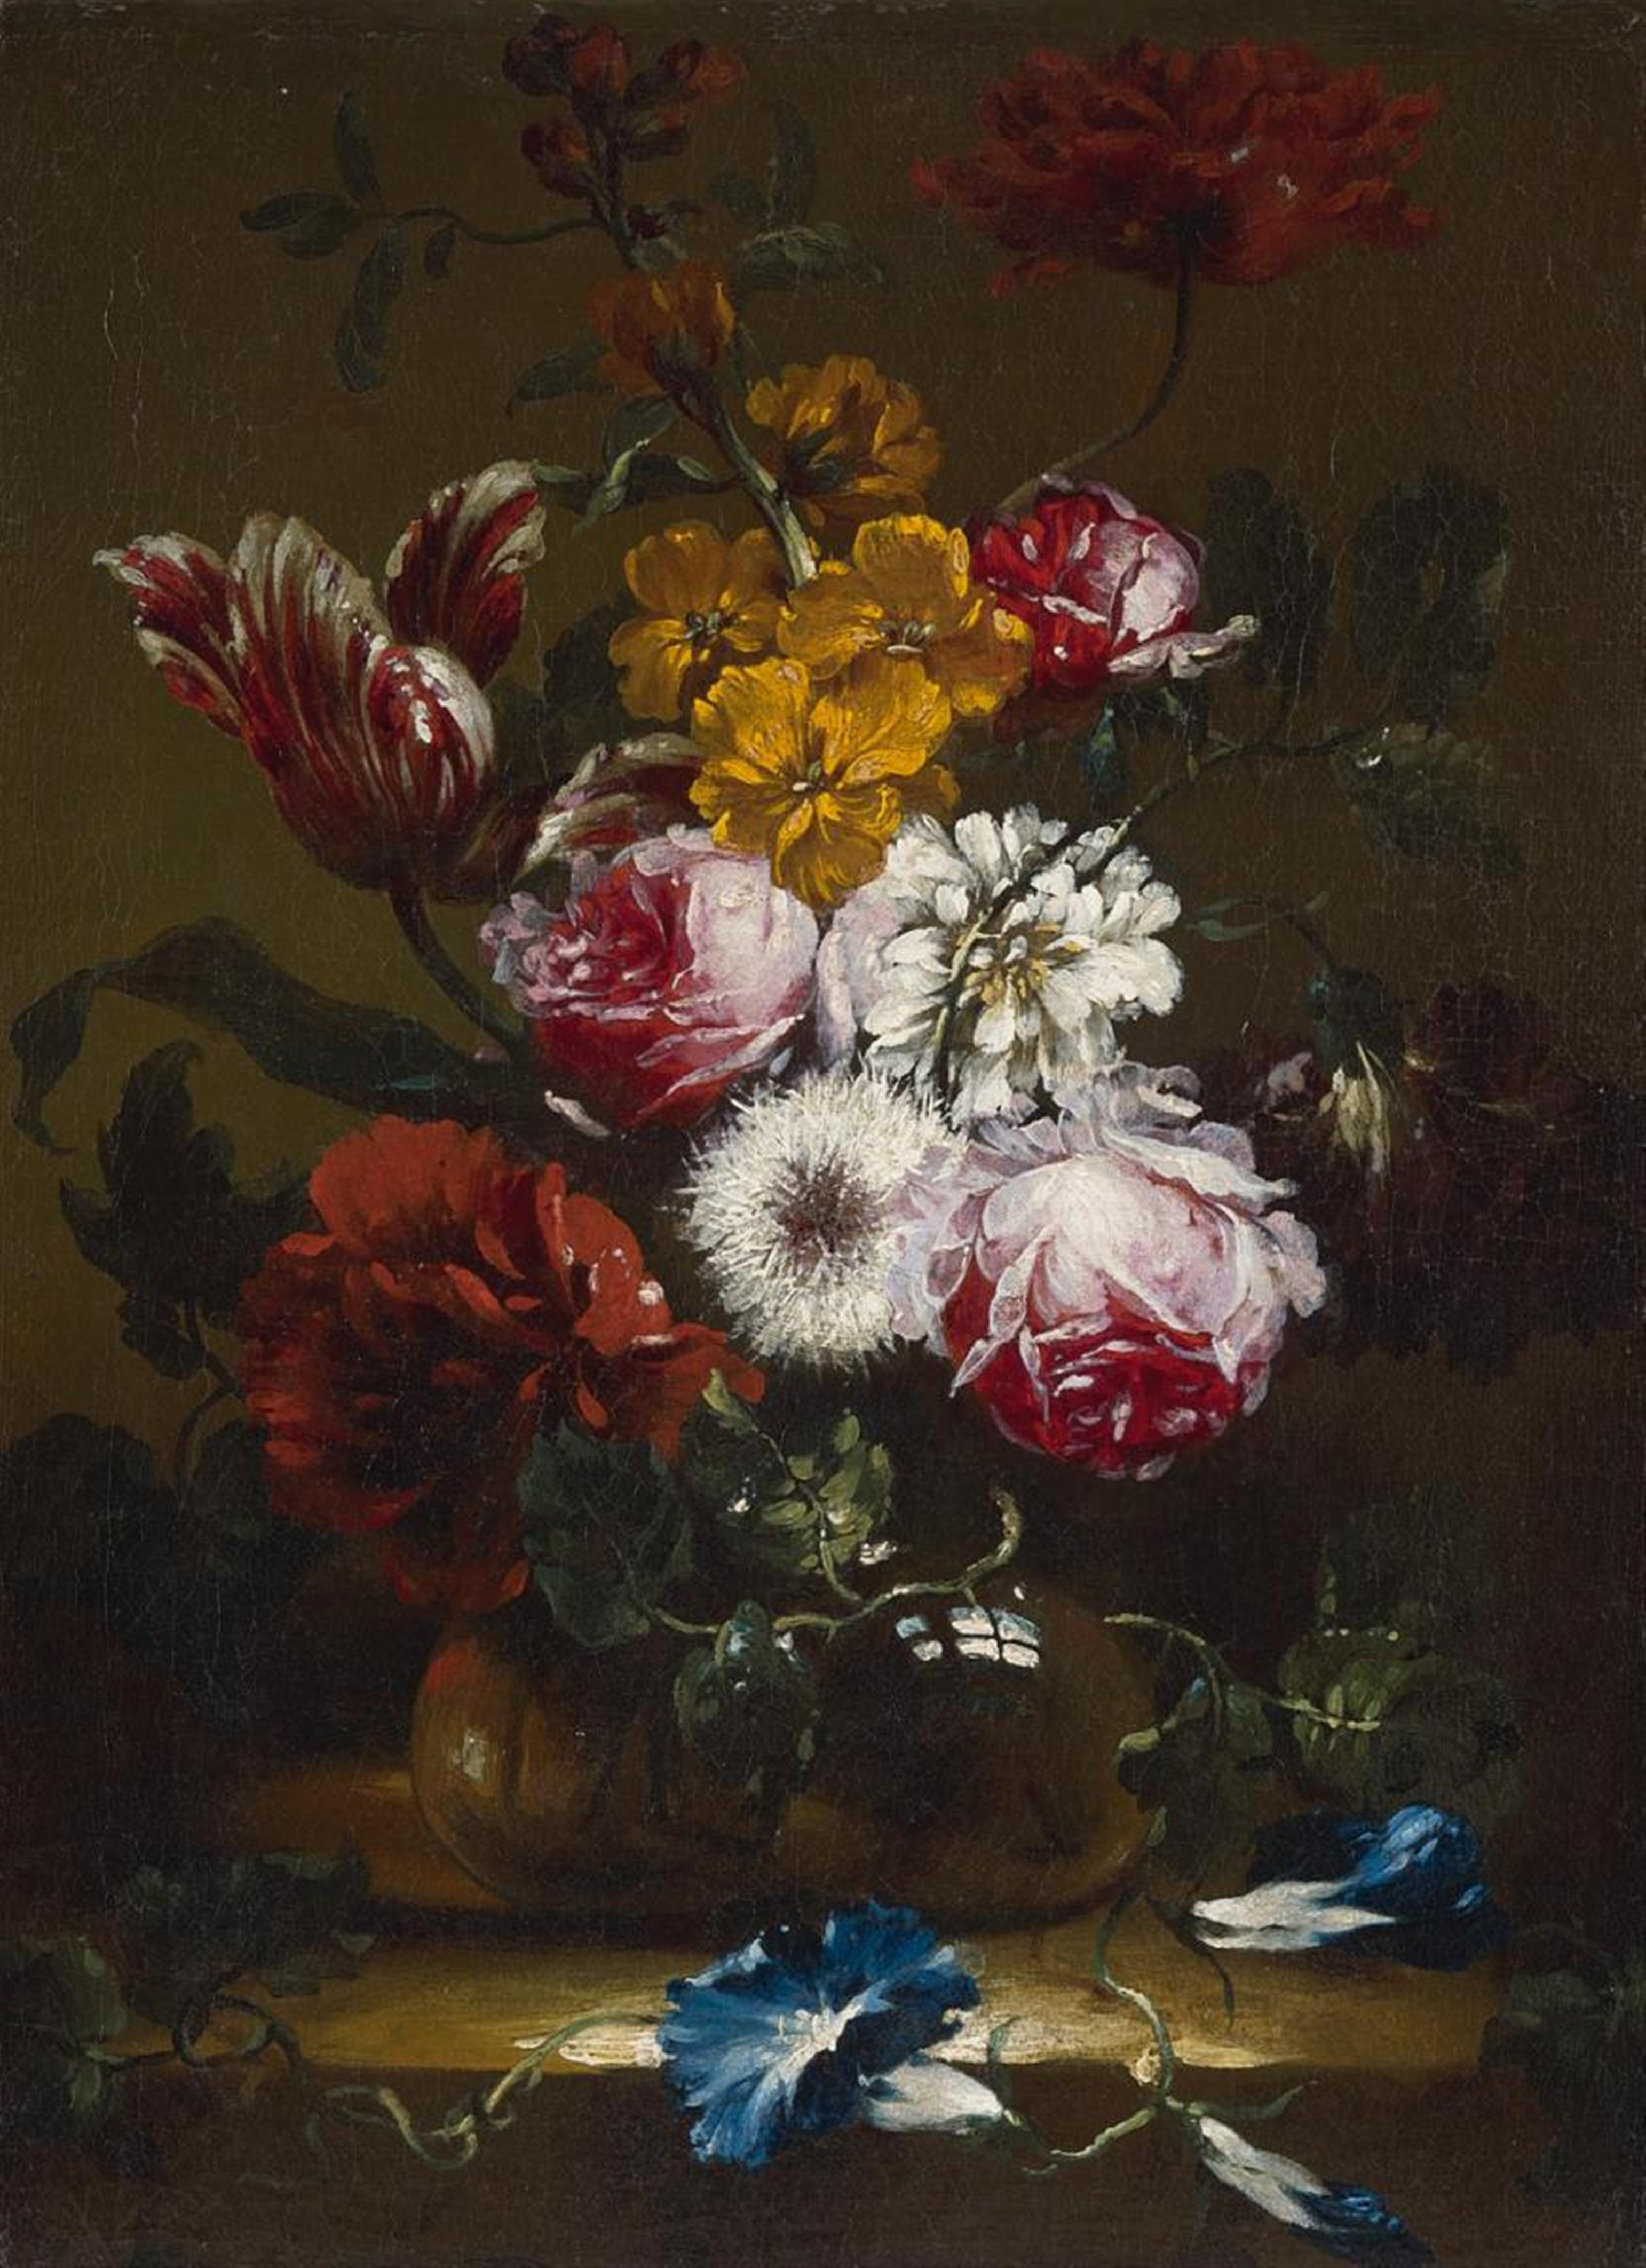 Nicolas Baudesson - ROSES, TULIPS, BINDWEED AND OTHER FLOWERS IN A VASE - image-1